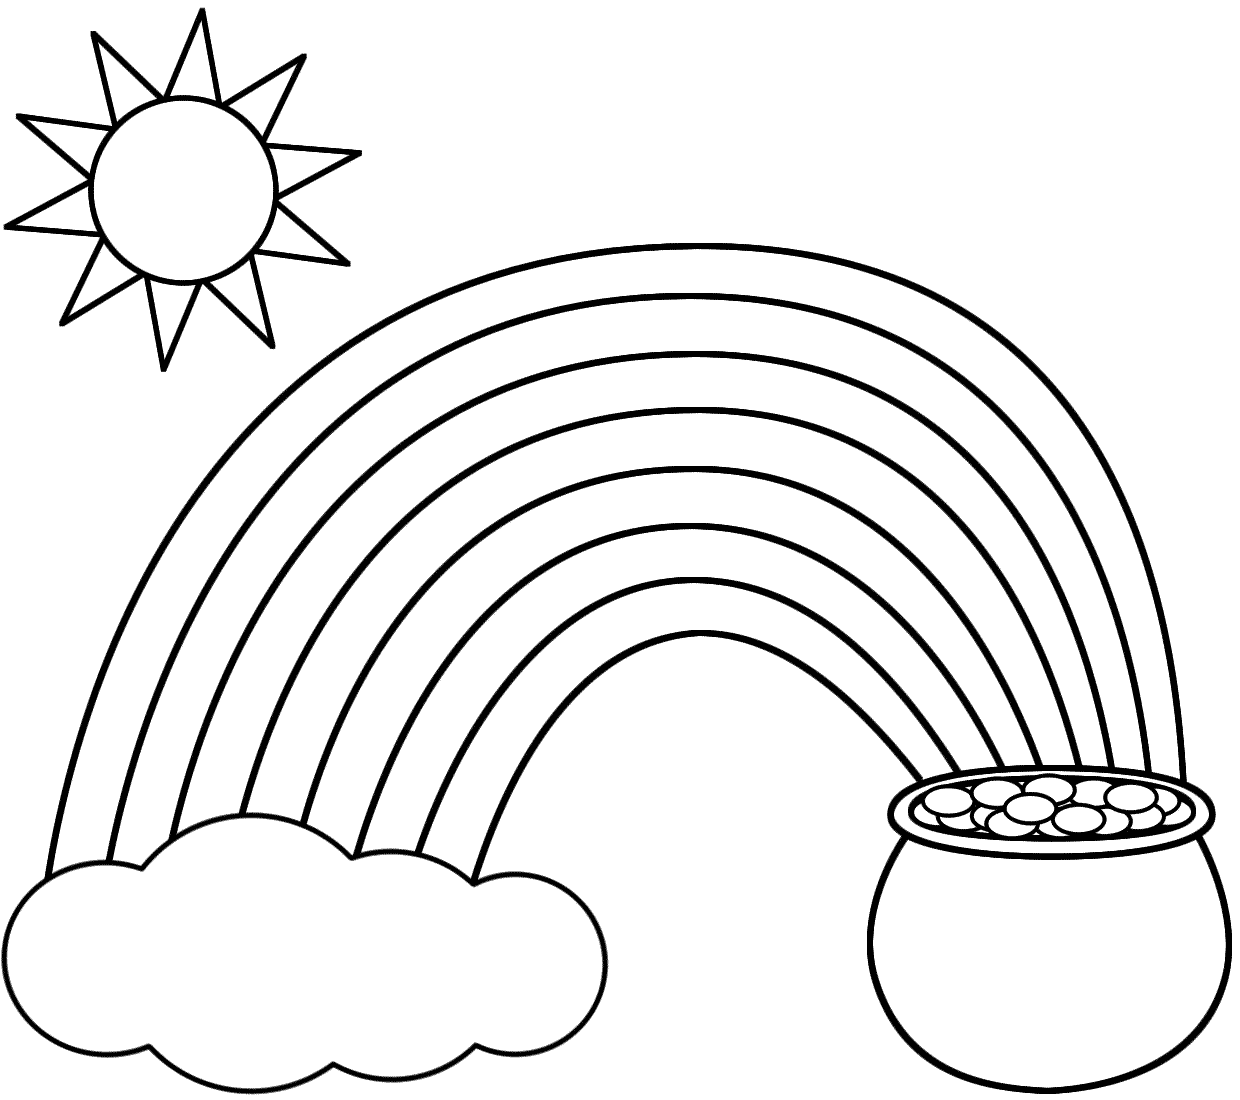 rainbow coloring pages | Only Coloring Pages